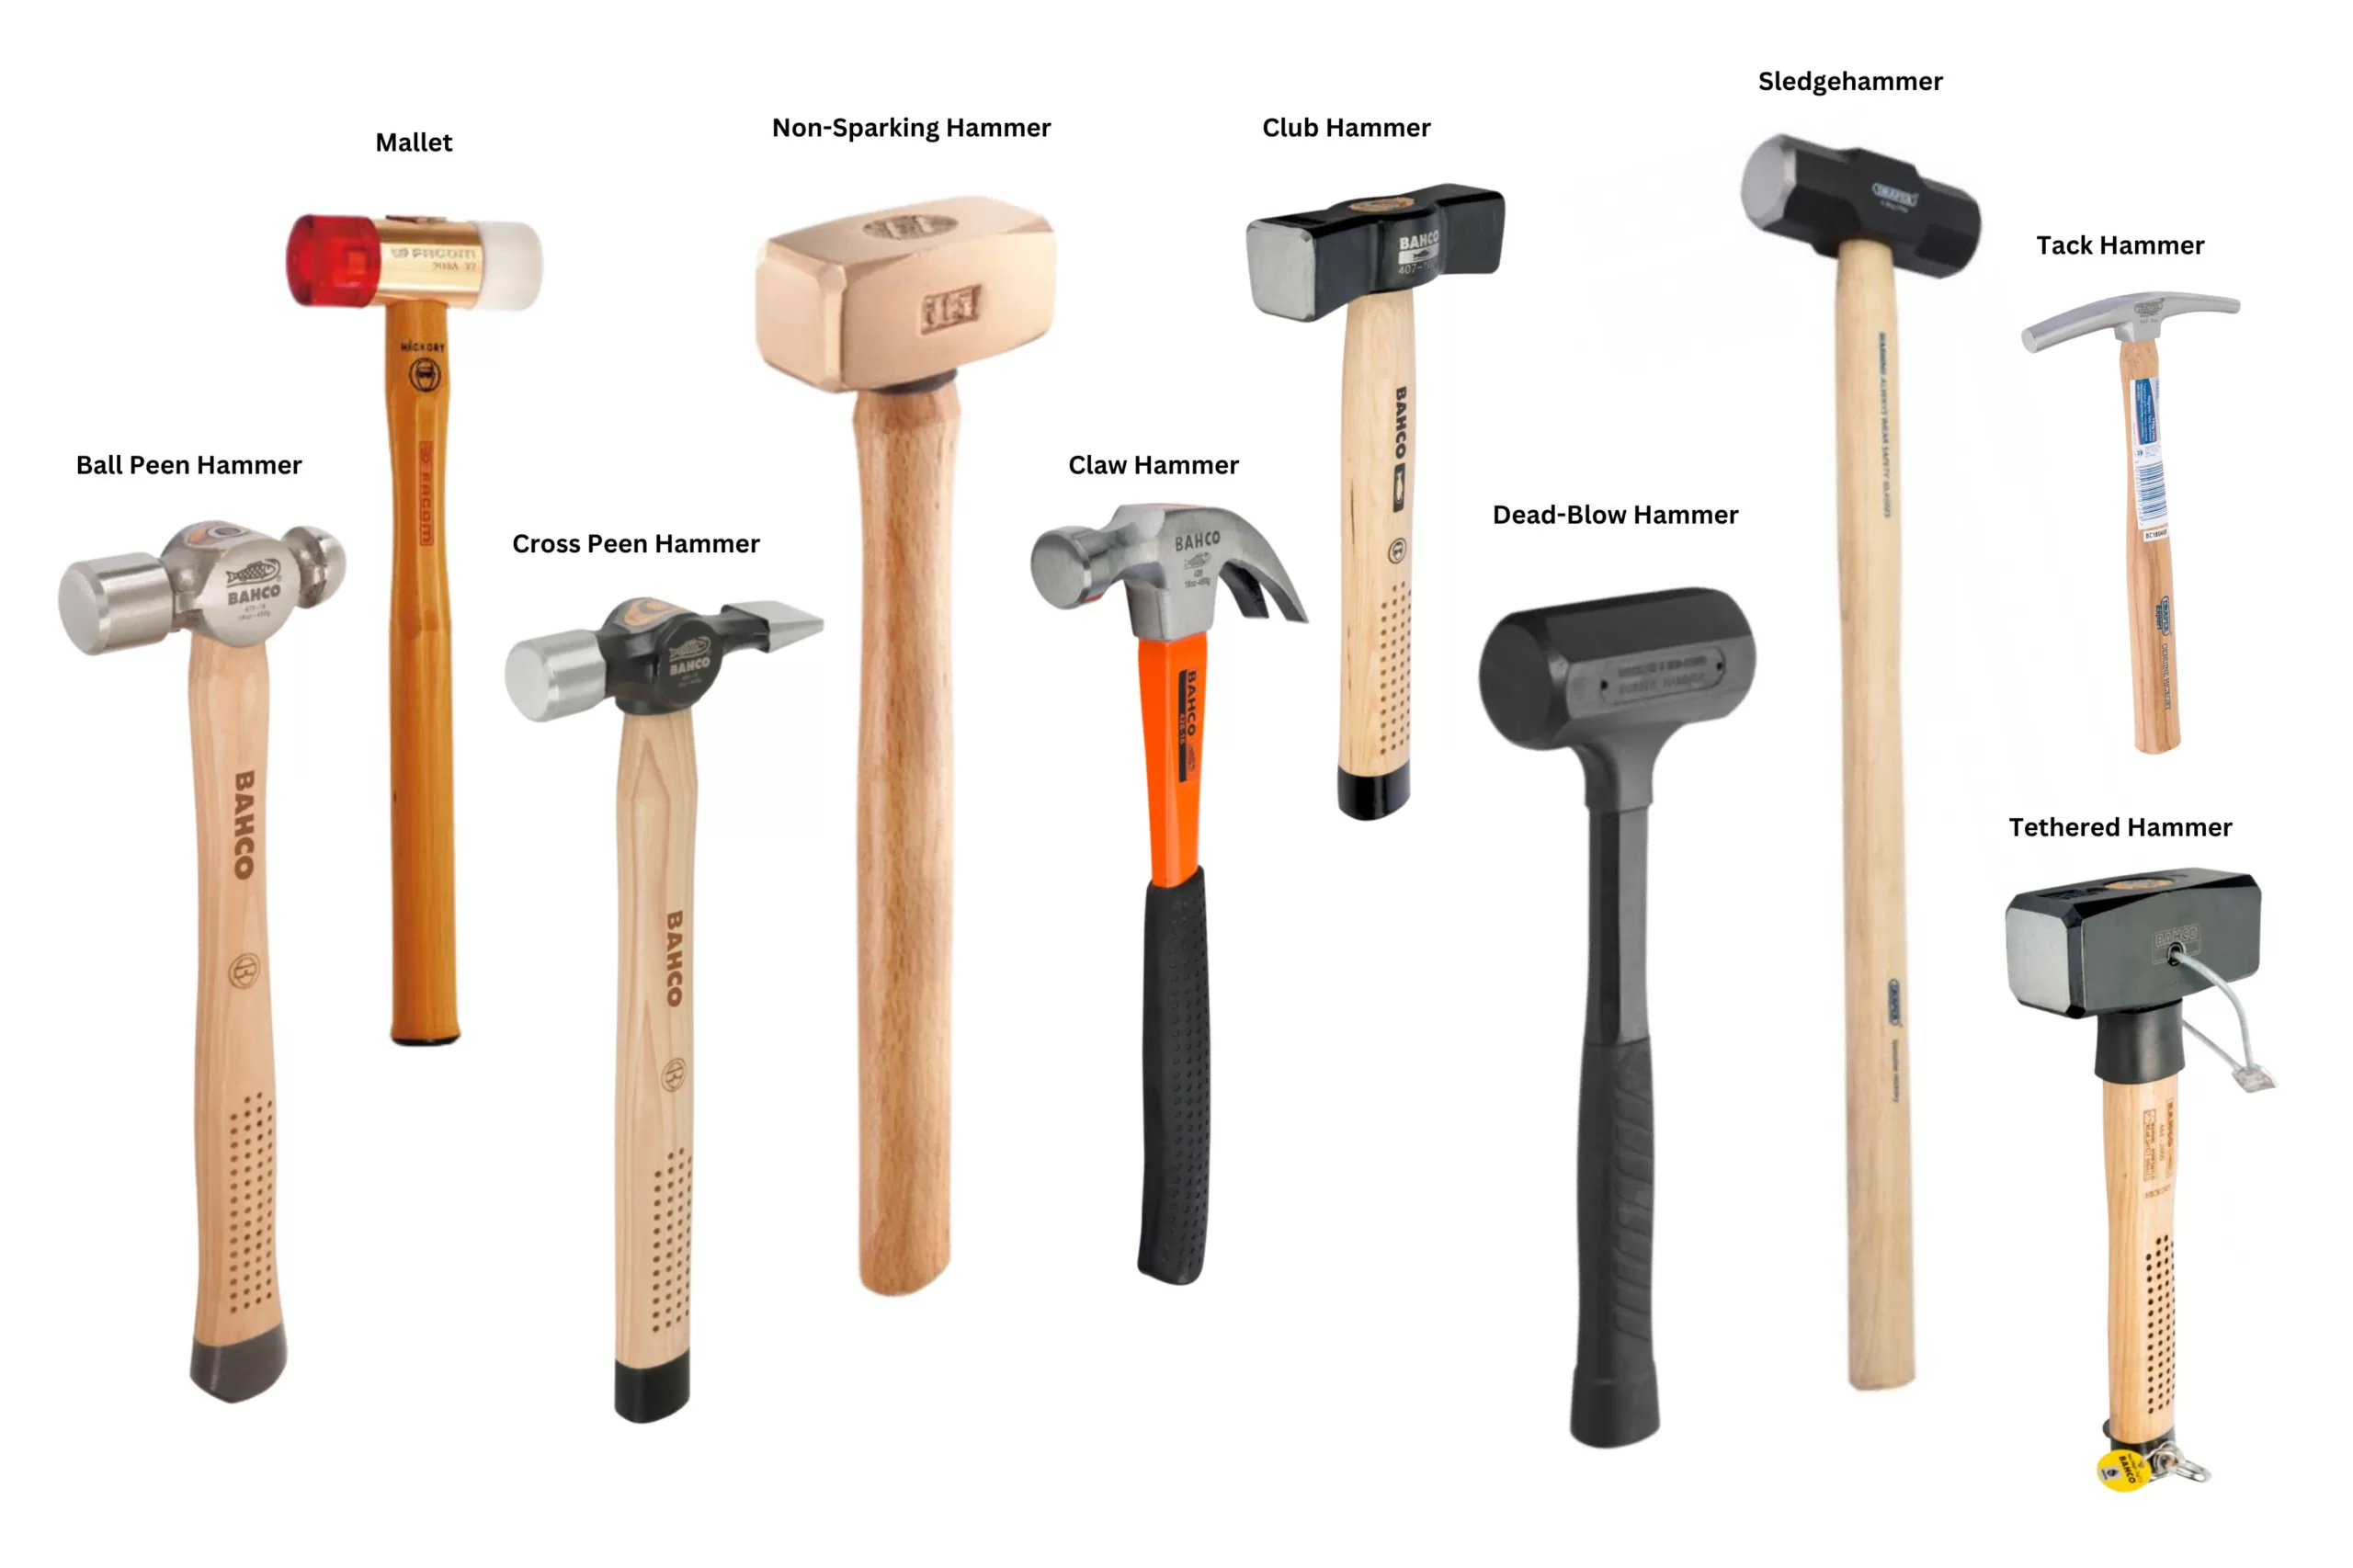 Assorted, Size, Shap, Material, Weight and Brand Hammer, Wood Ball Peen  Hammer